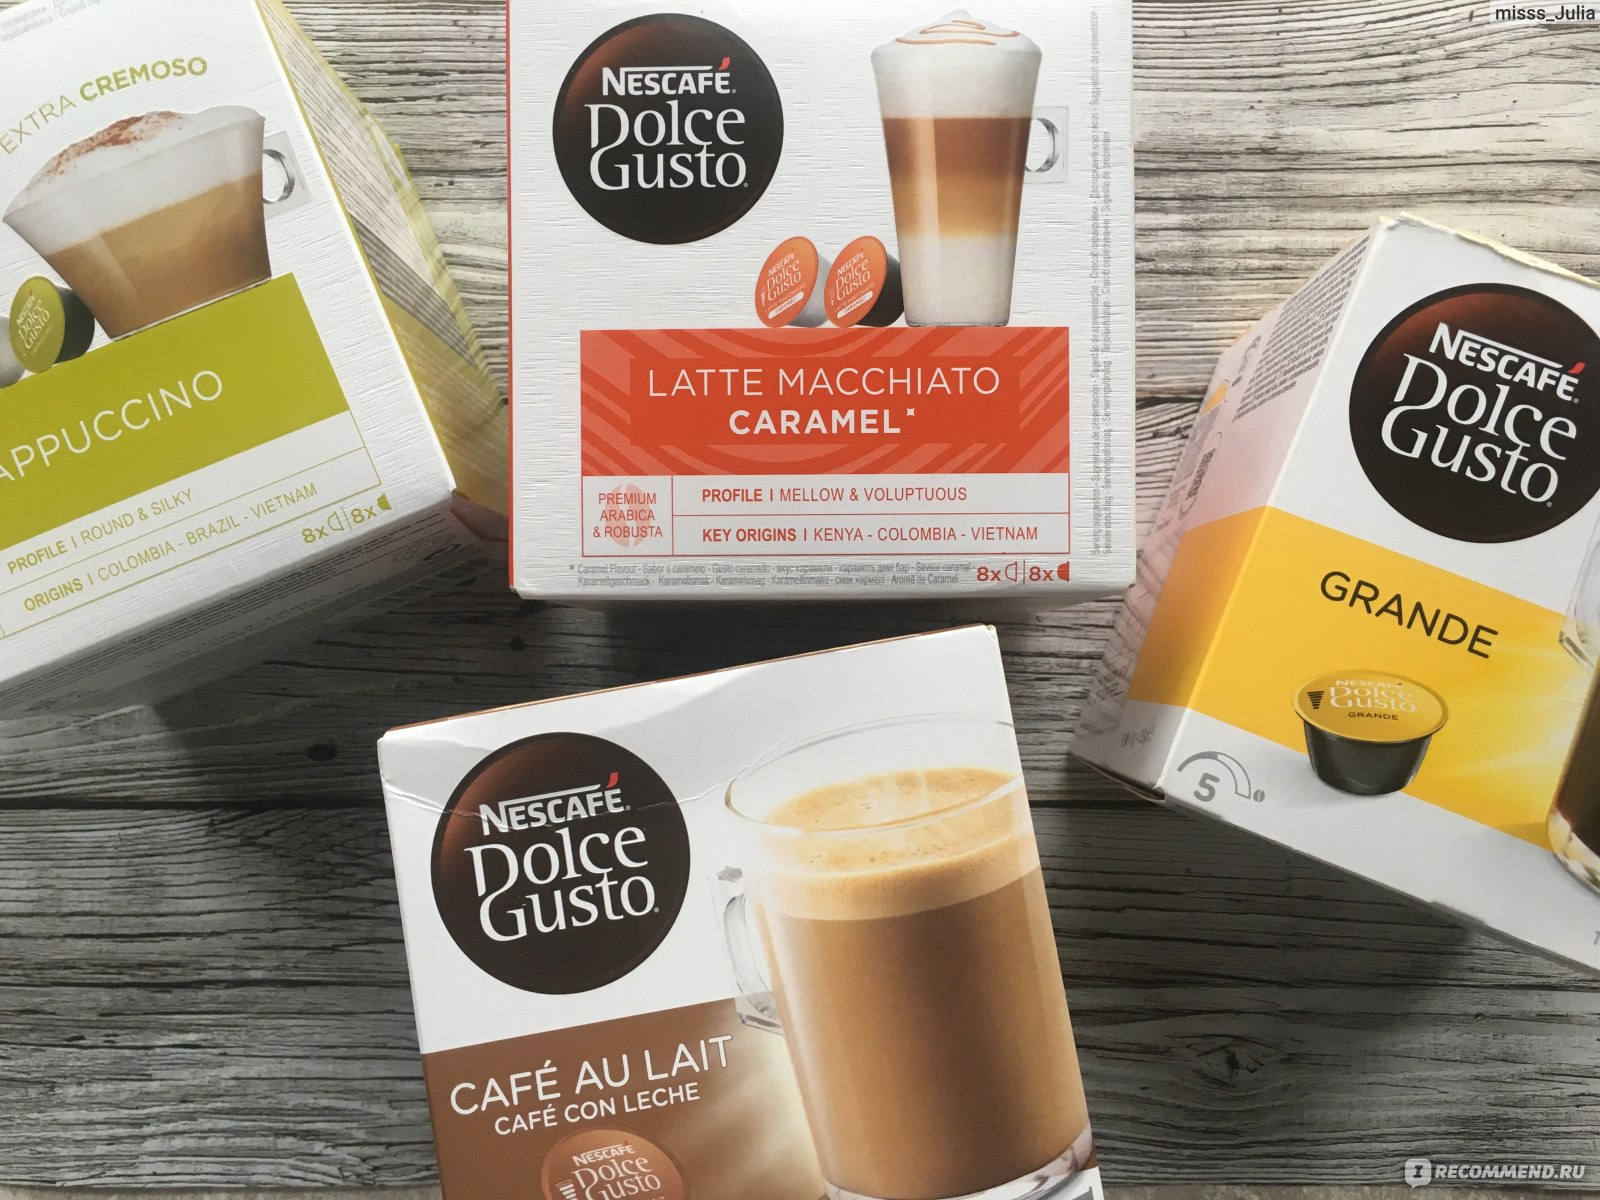 Dolce gusto cappuccino. Капсулы Dolce gusto Cappuccino. Капсулы Дольче густо капучино карамель. Капсулы Nescafe Dolce gusto Cappuccino 30шт. Капсулы Nescafe Dolce gusto Cappuccino 8*23.3гр (3).